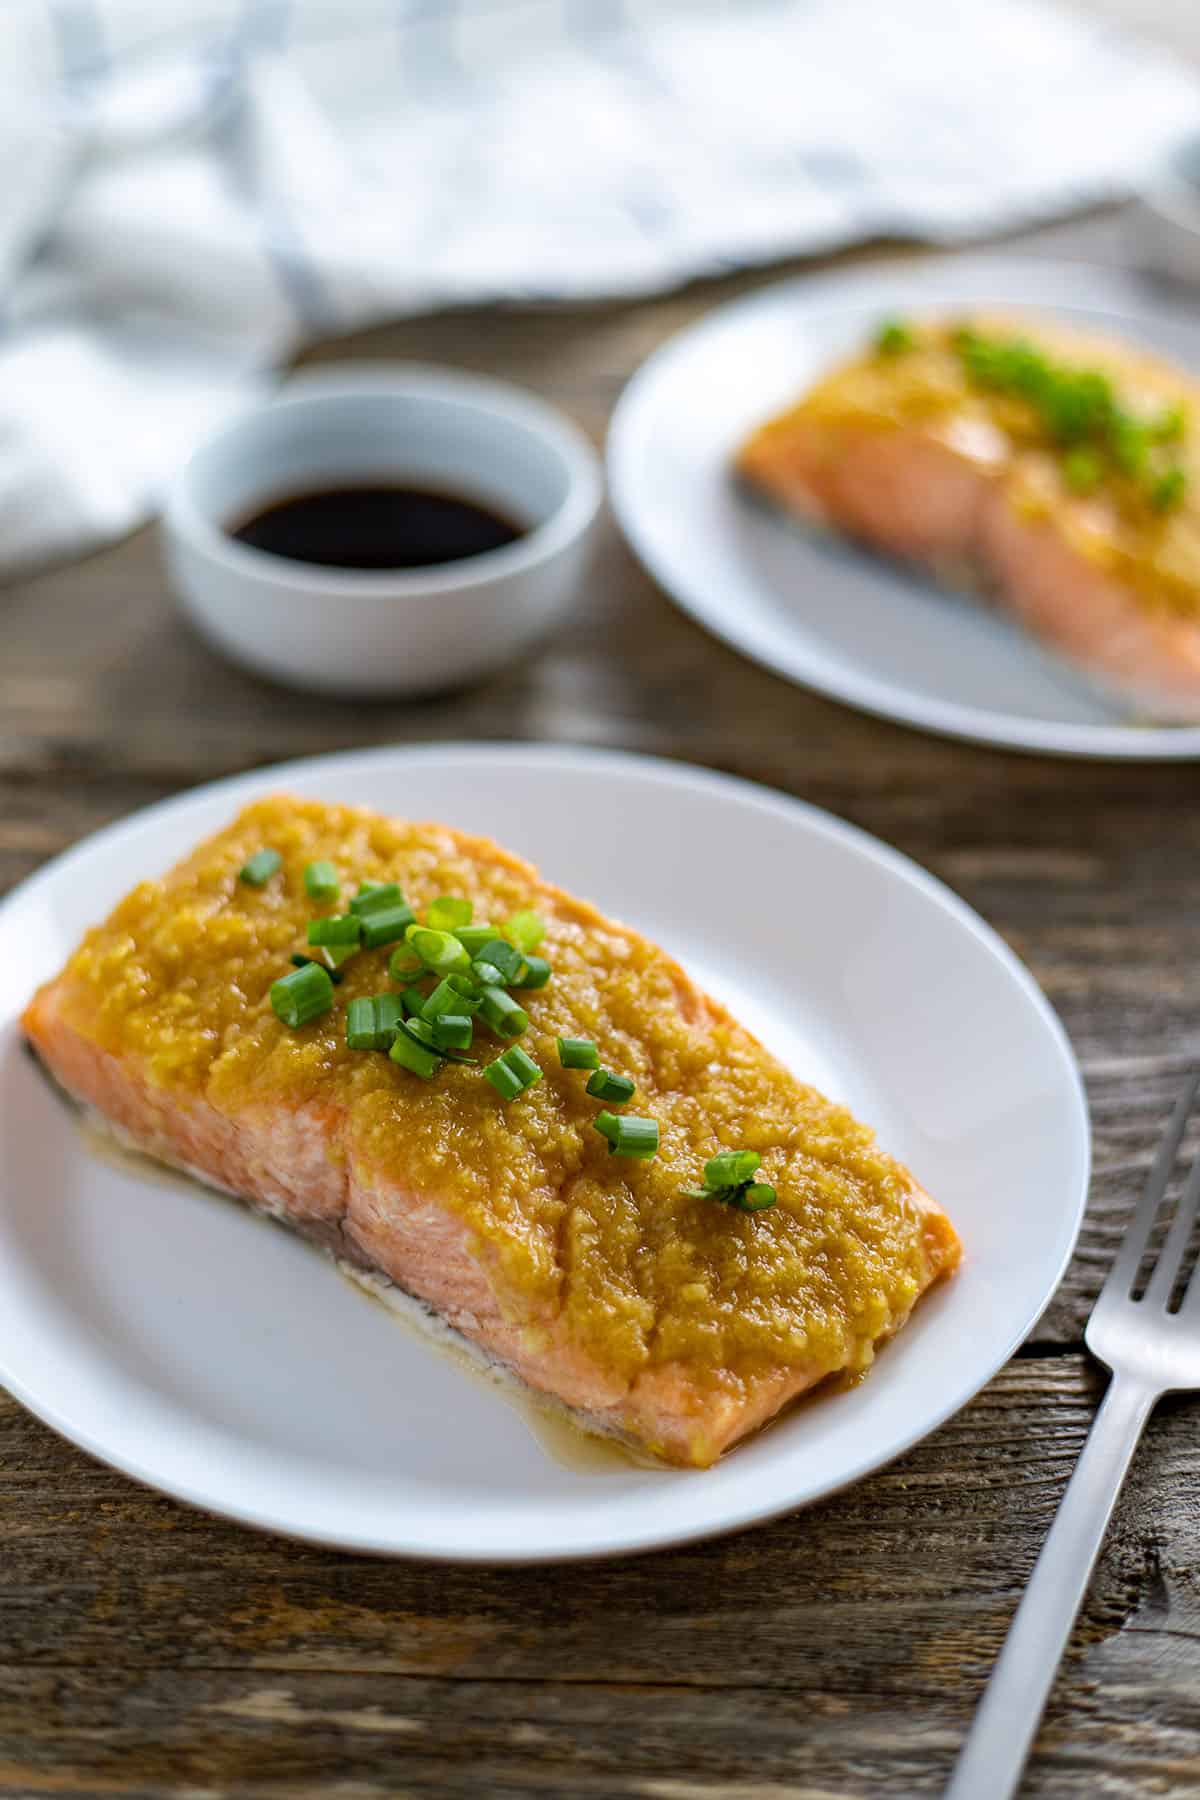 One salmon fillet topped with miso ginger apple topping.